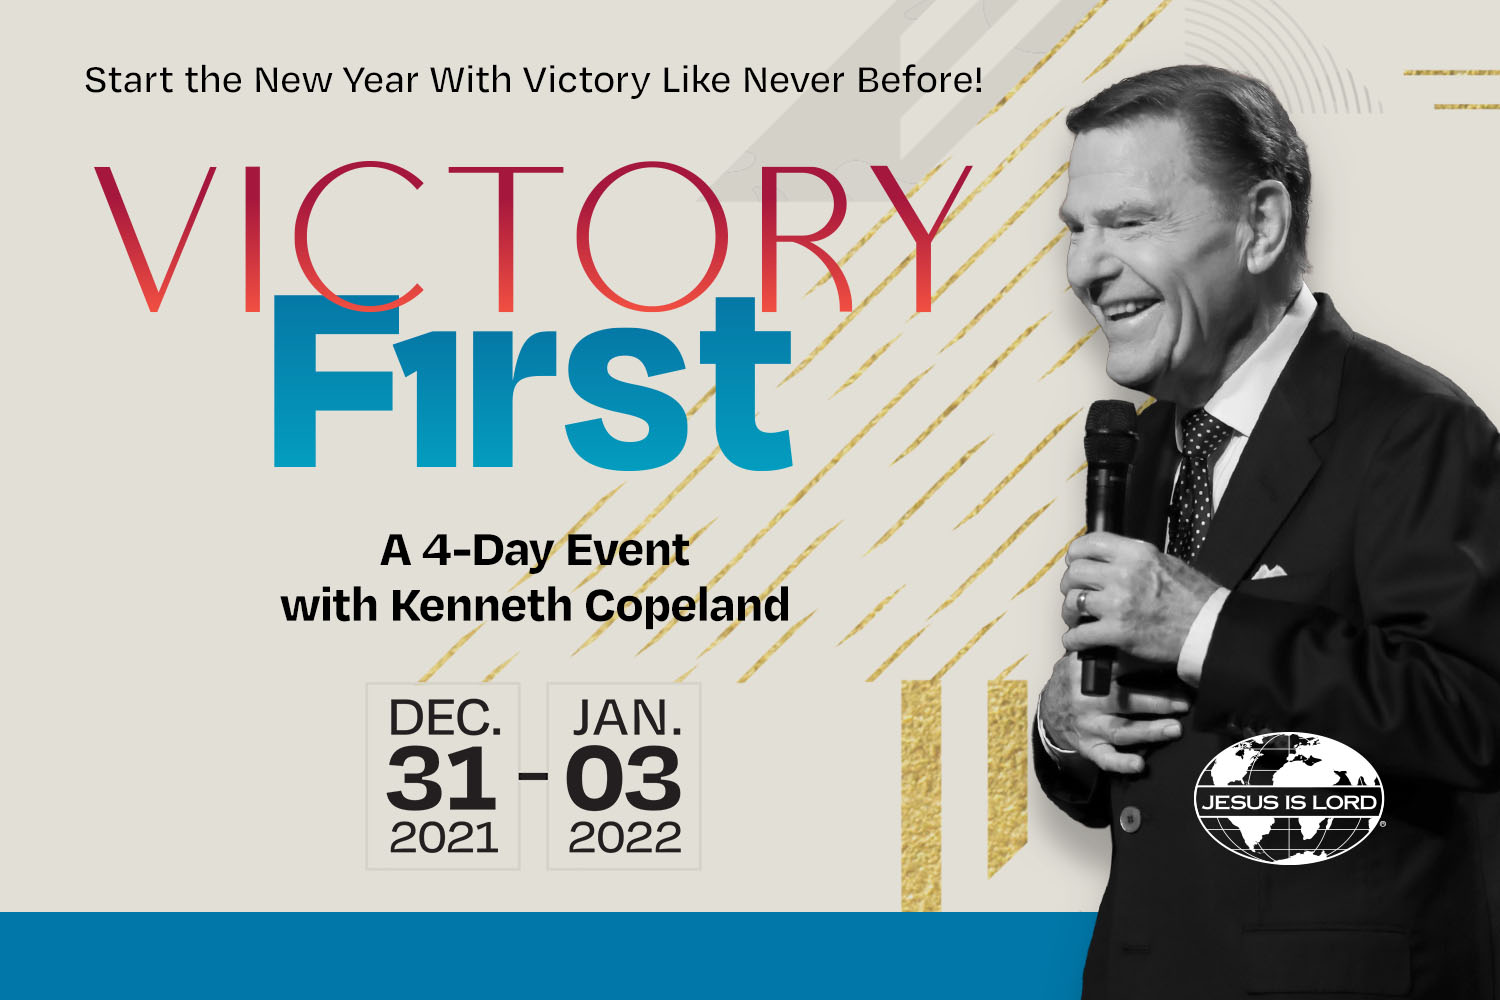 Victory First - Kenneth Copeland Event